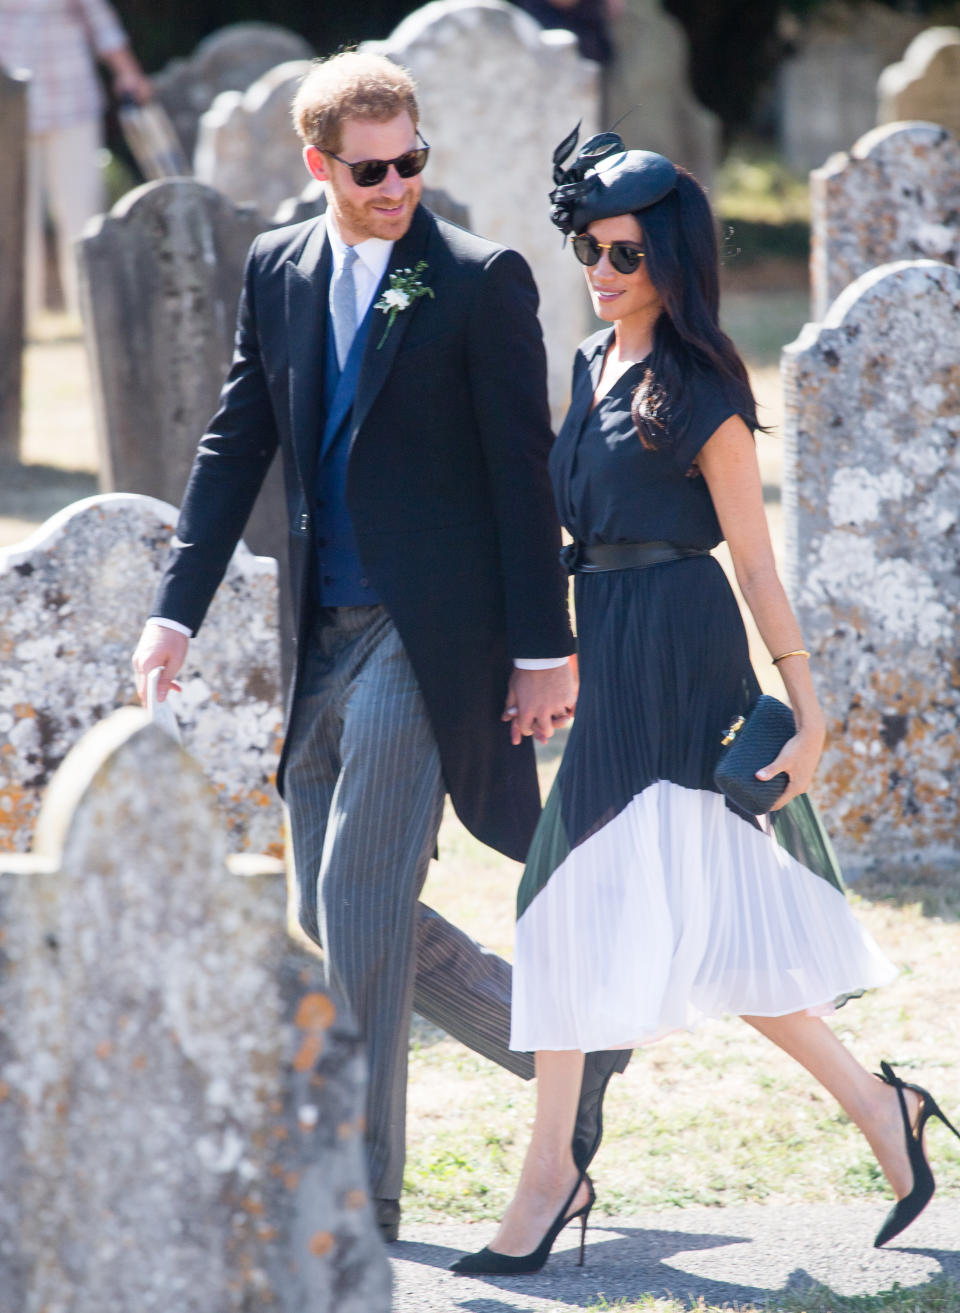 On August 4, the Duke and Duchess of Sussex attended Charlie Van Straubenzee and Daisy Jenk’s wedding [Photo: Getty]